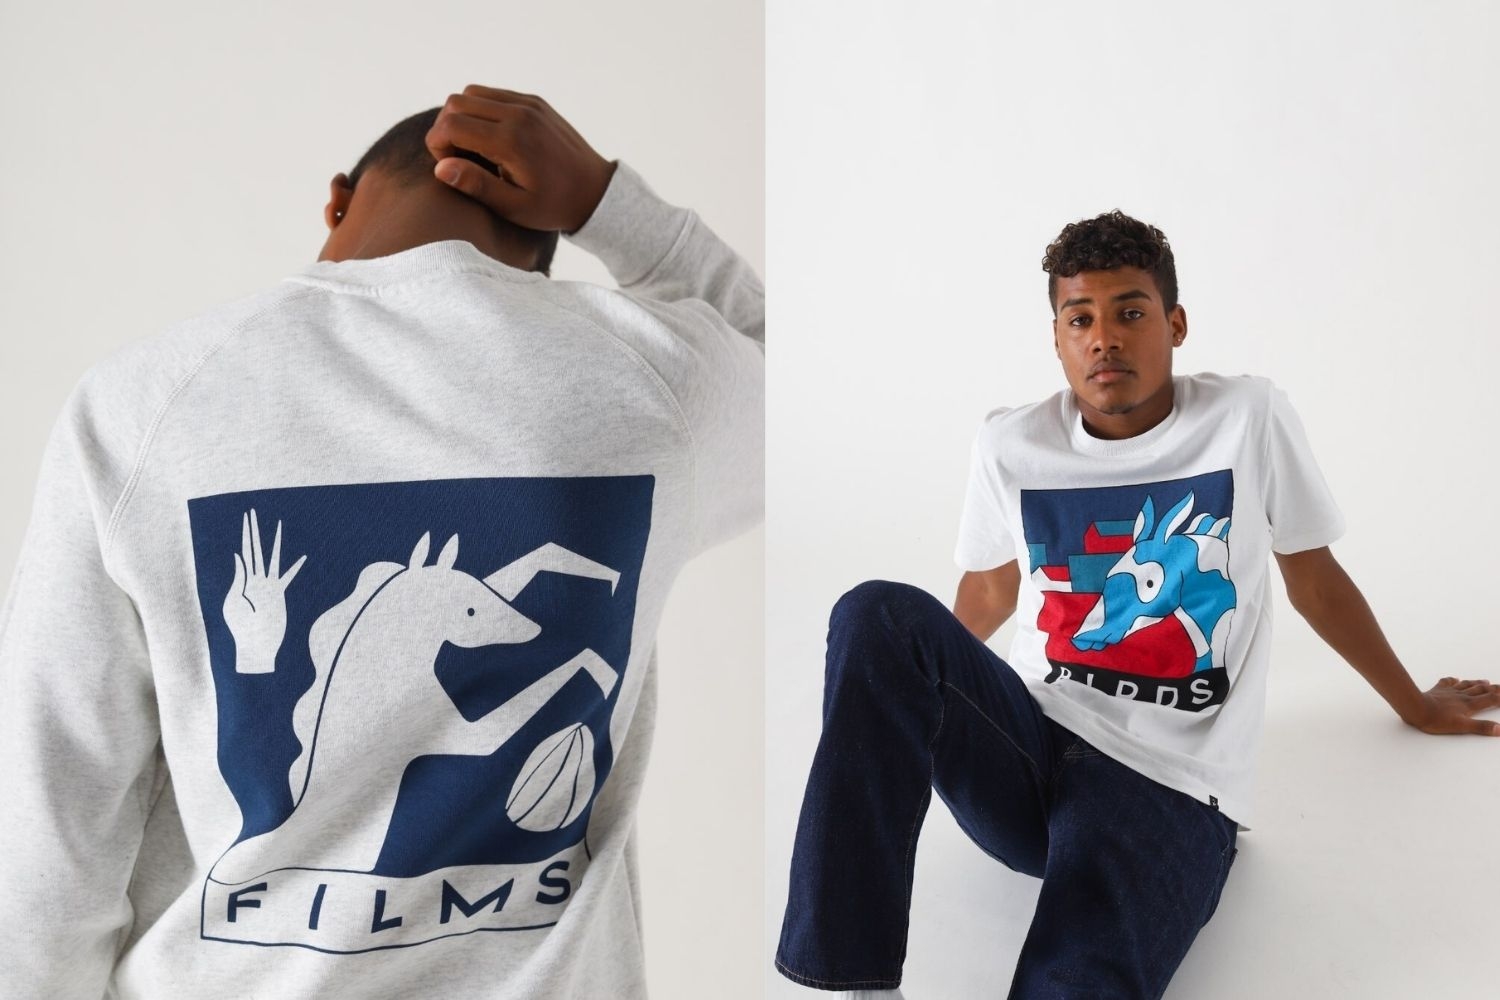 Shop the new By Parra collection now at Freshcotton